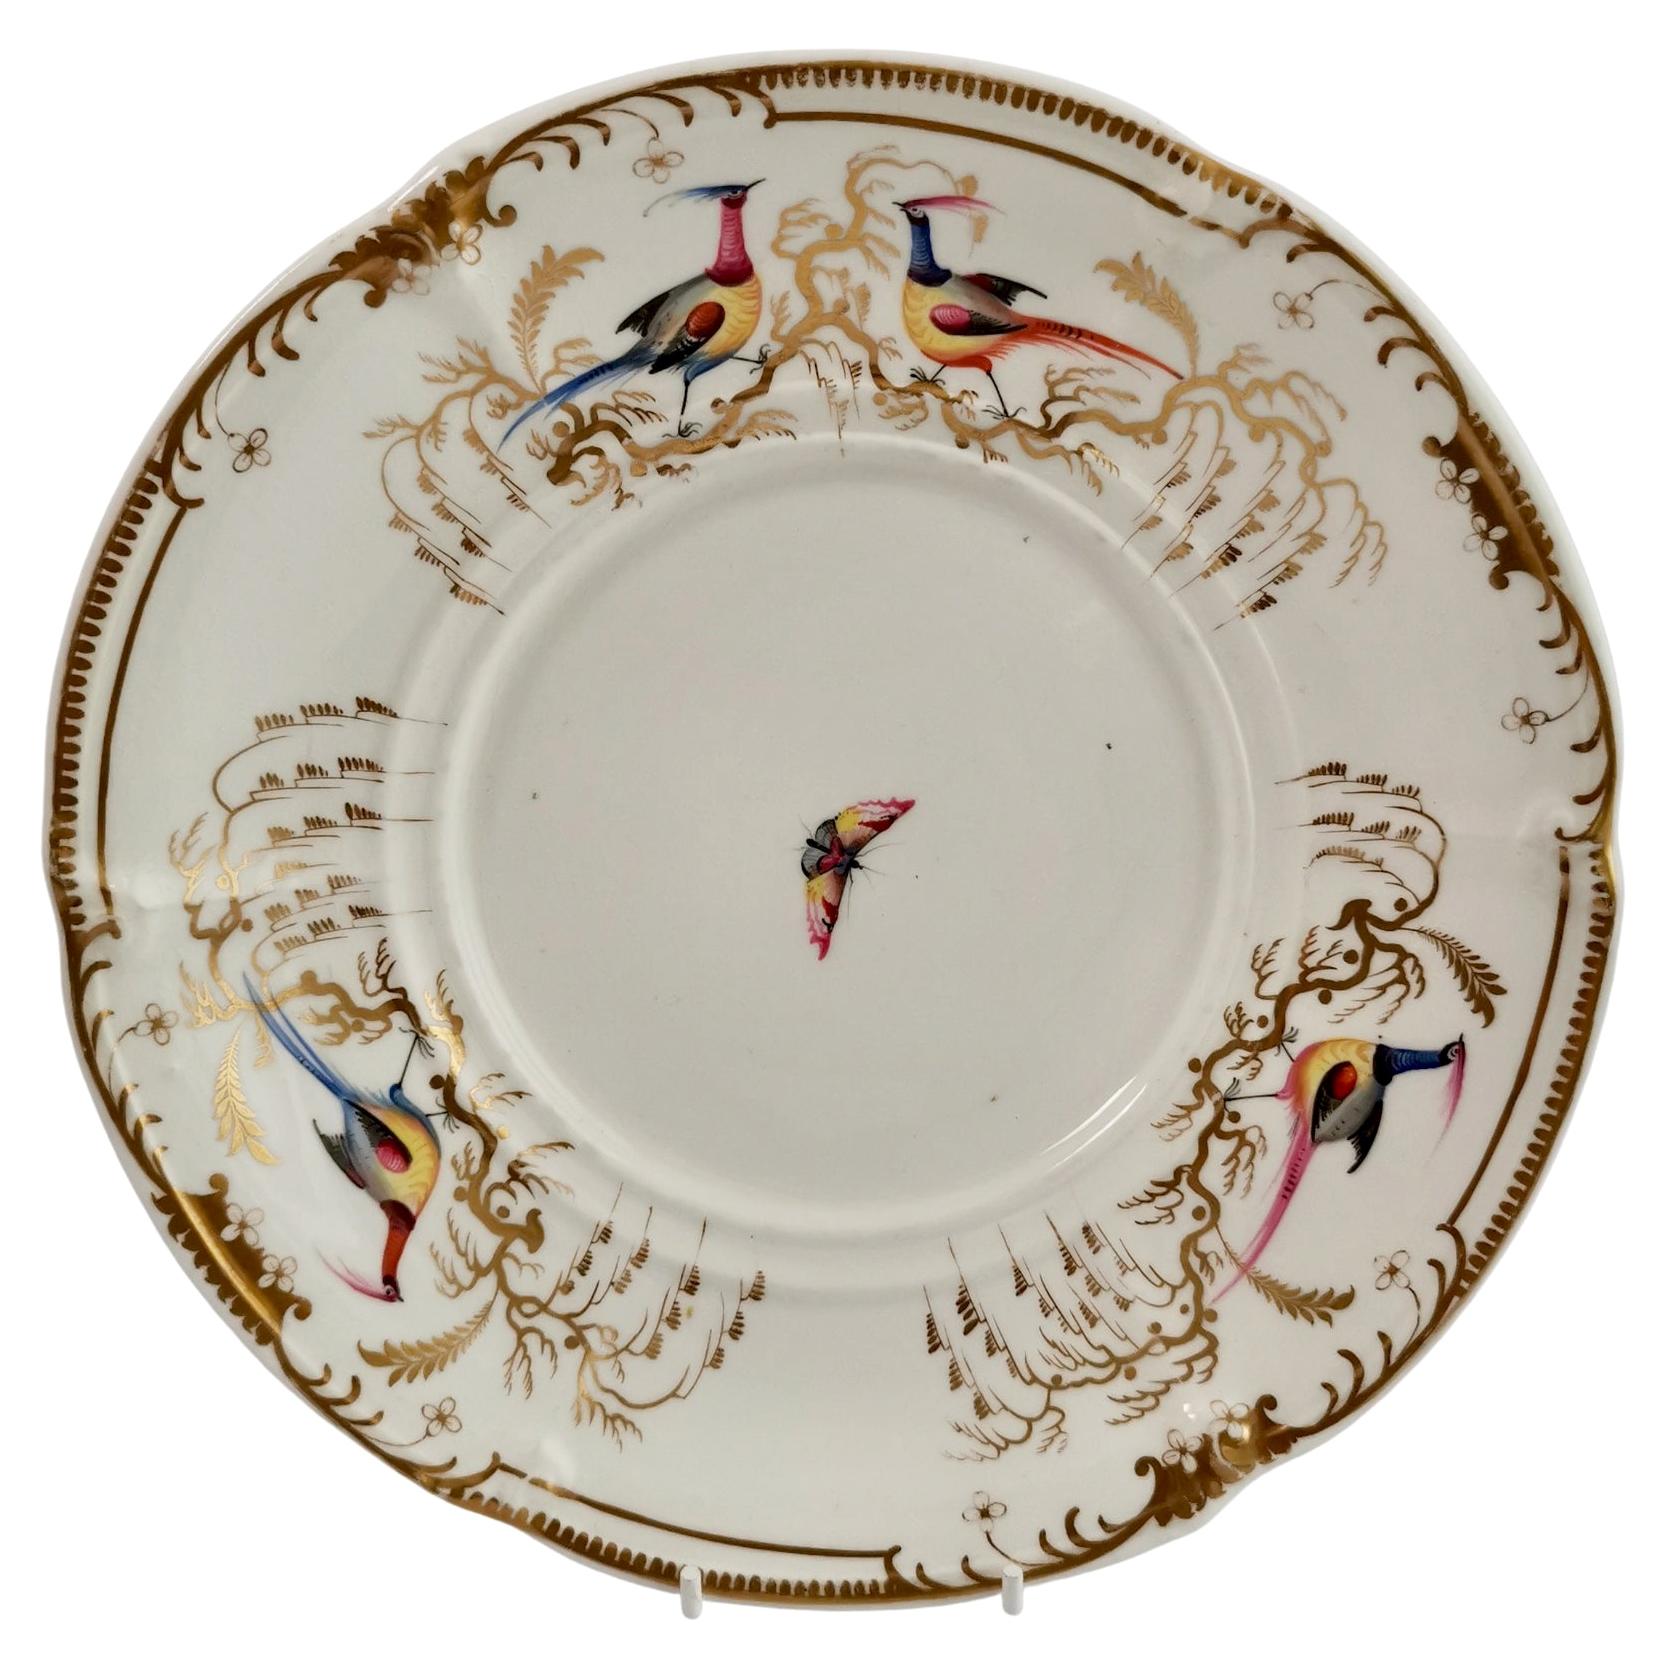 Davenport Porcelain Plate / Stand, White with Sèvres Style Birds, 1830-1837